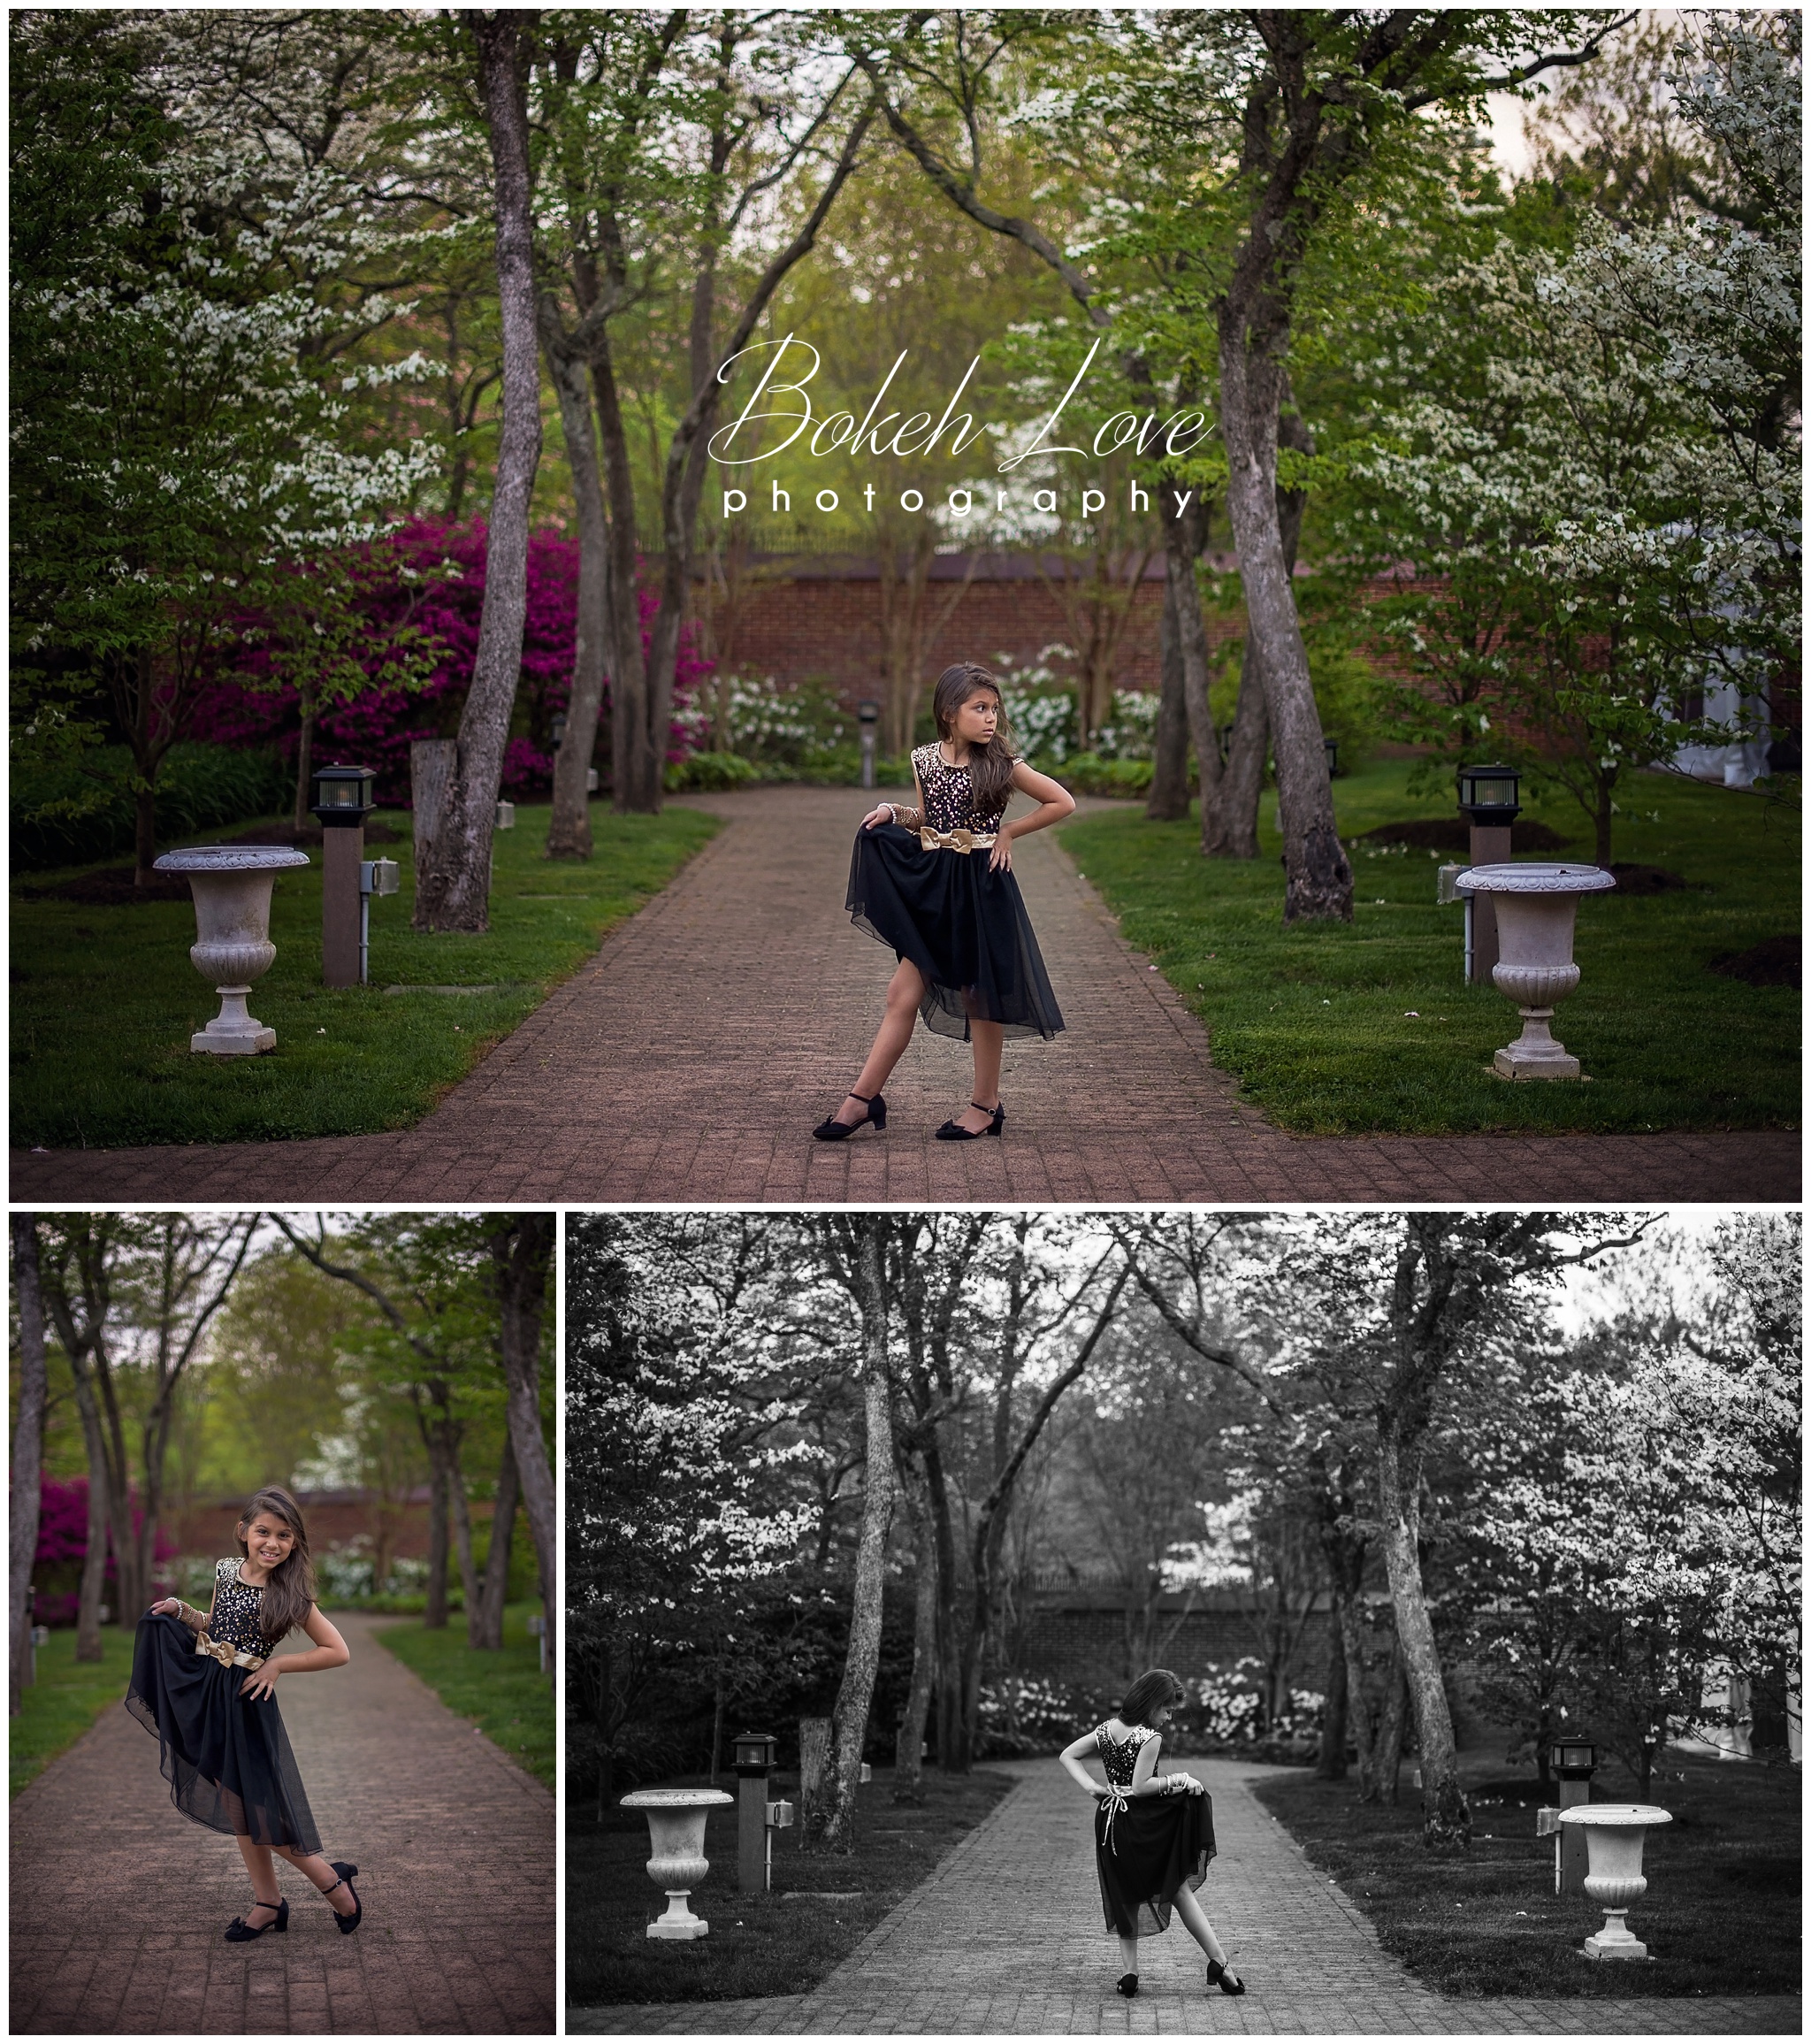 Bokeh Love Photography, Birthday Portraits at the Smithville Mansion